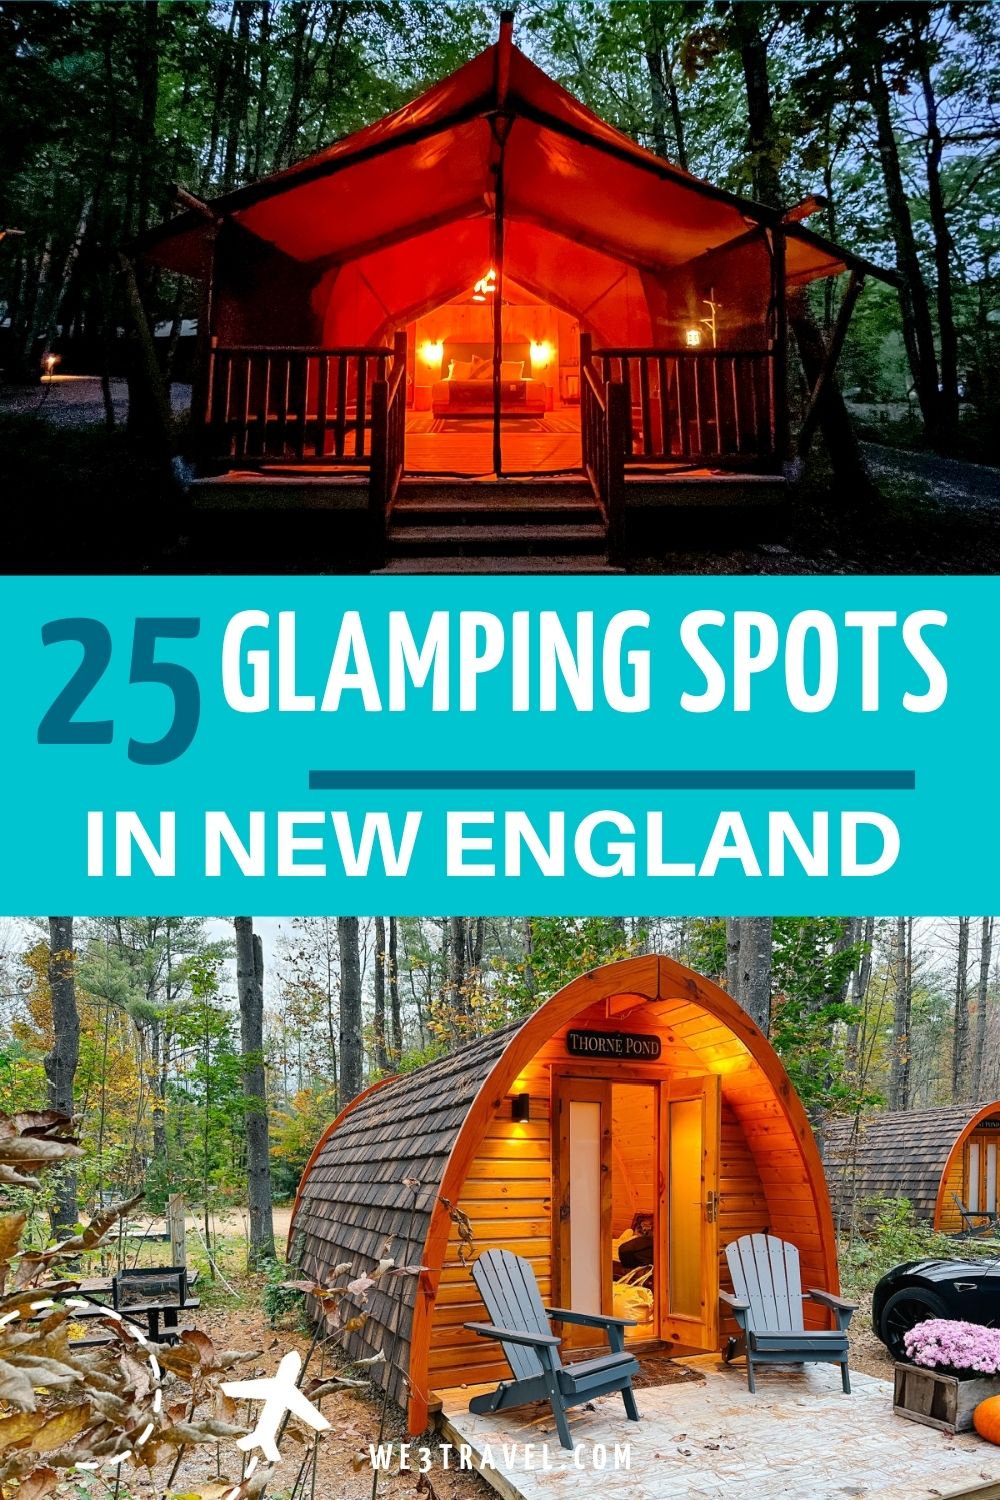 25 Places to go Glamping in New England from luxury glamping safari tents to cozy cabins, treehouses, tiny homes, and even retro Airstream trailers, you will find your next weekend getaway spot in this list.